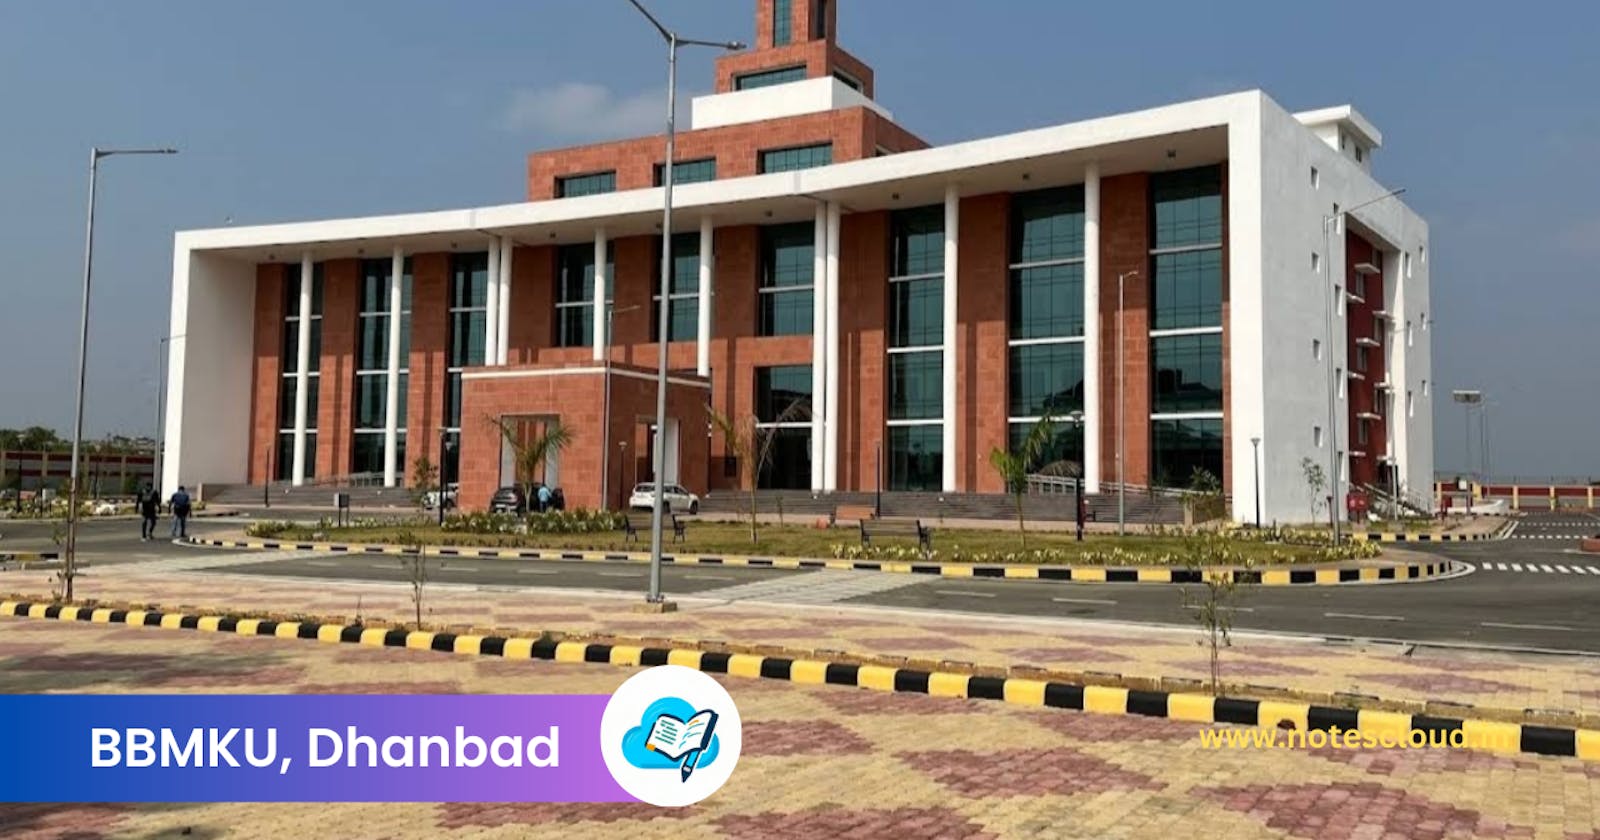 Courses Offered by BBMKU, Dhanbad